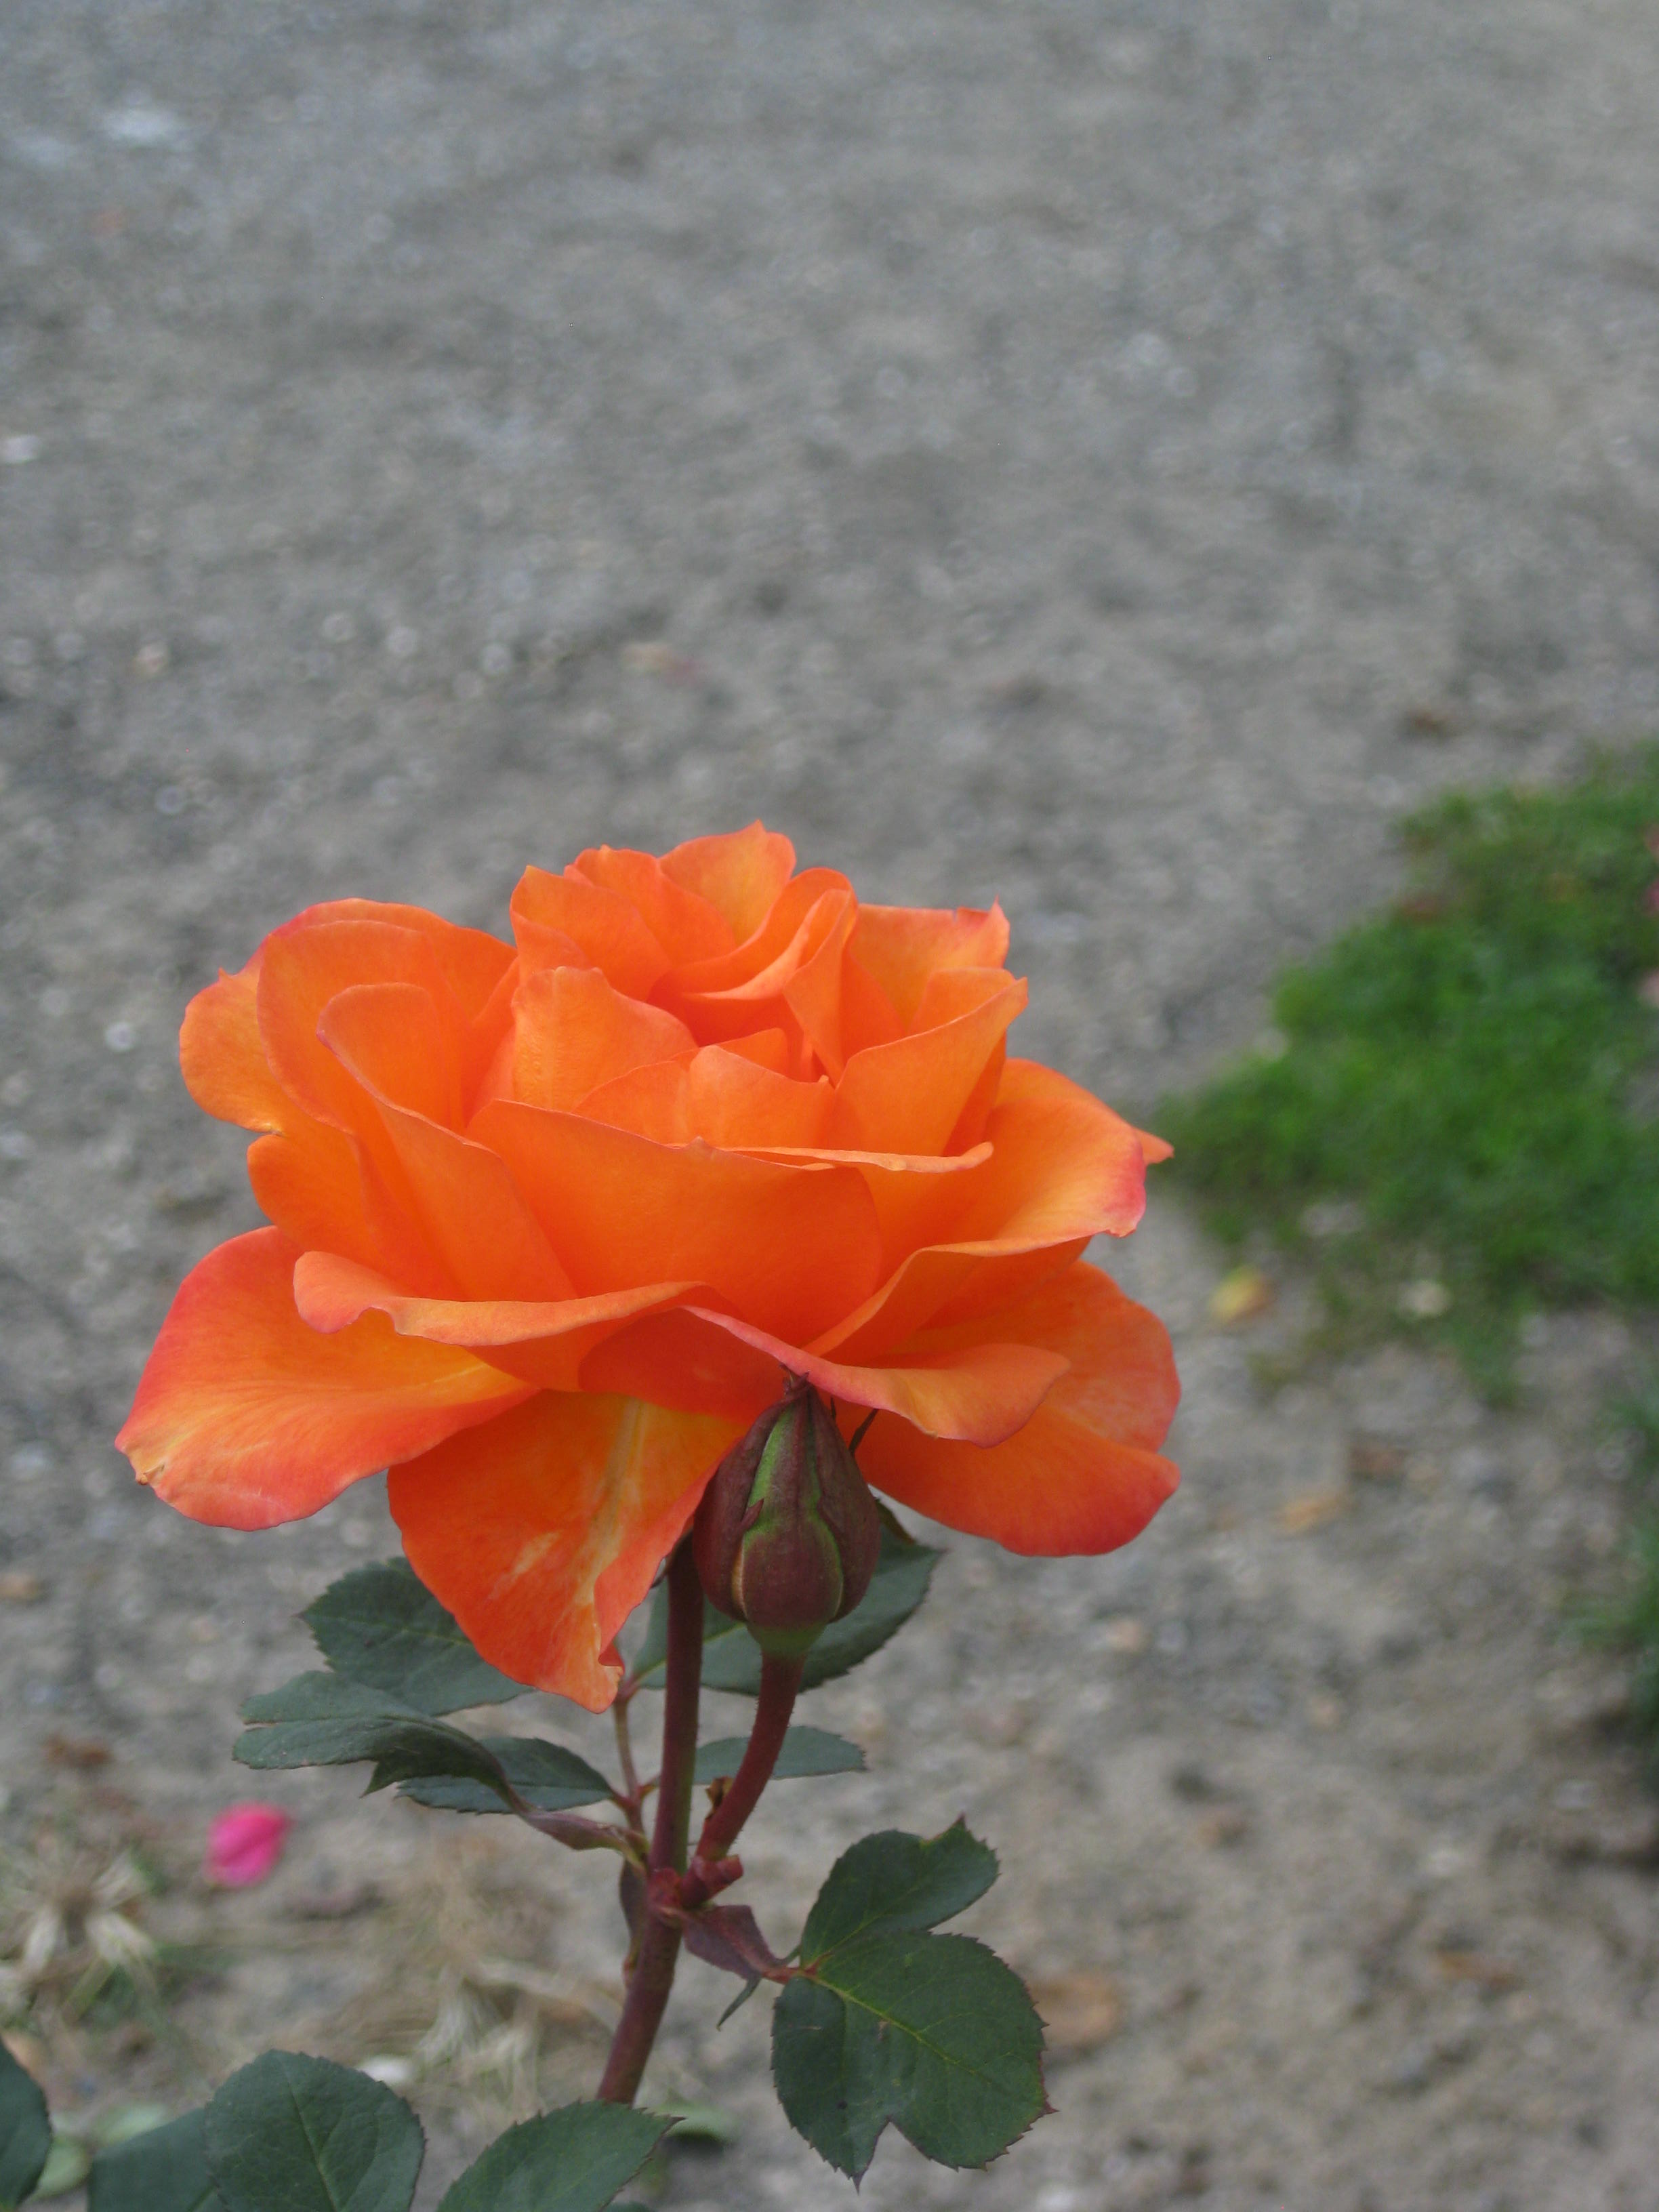 A Rose for Remembrance